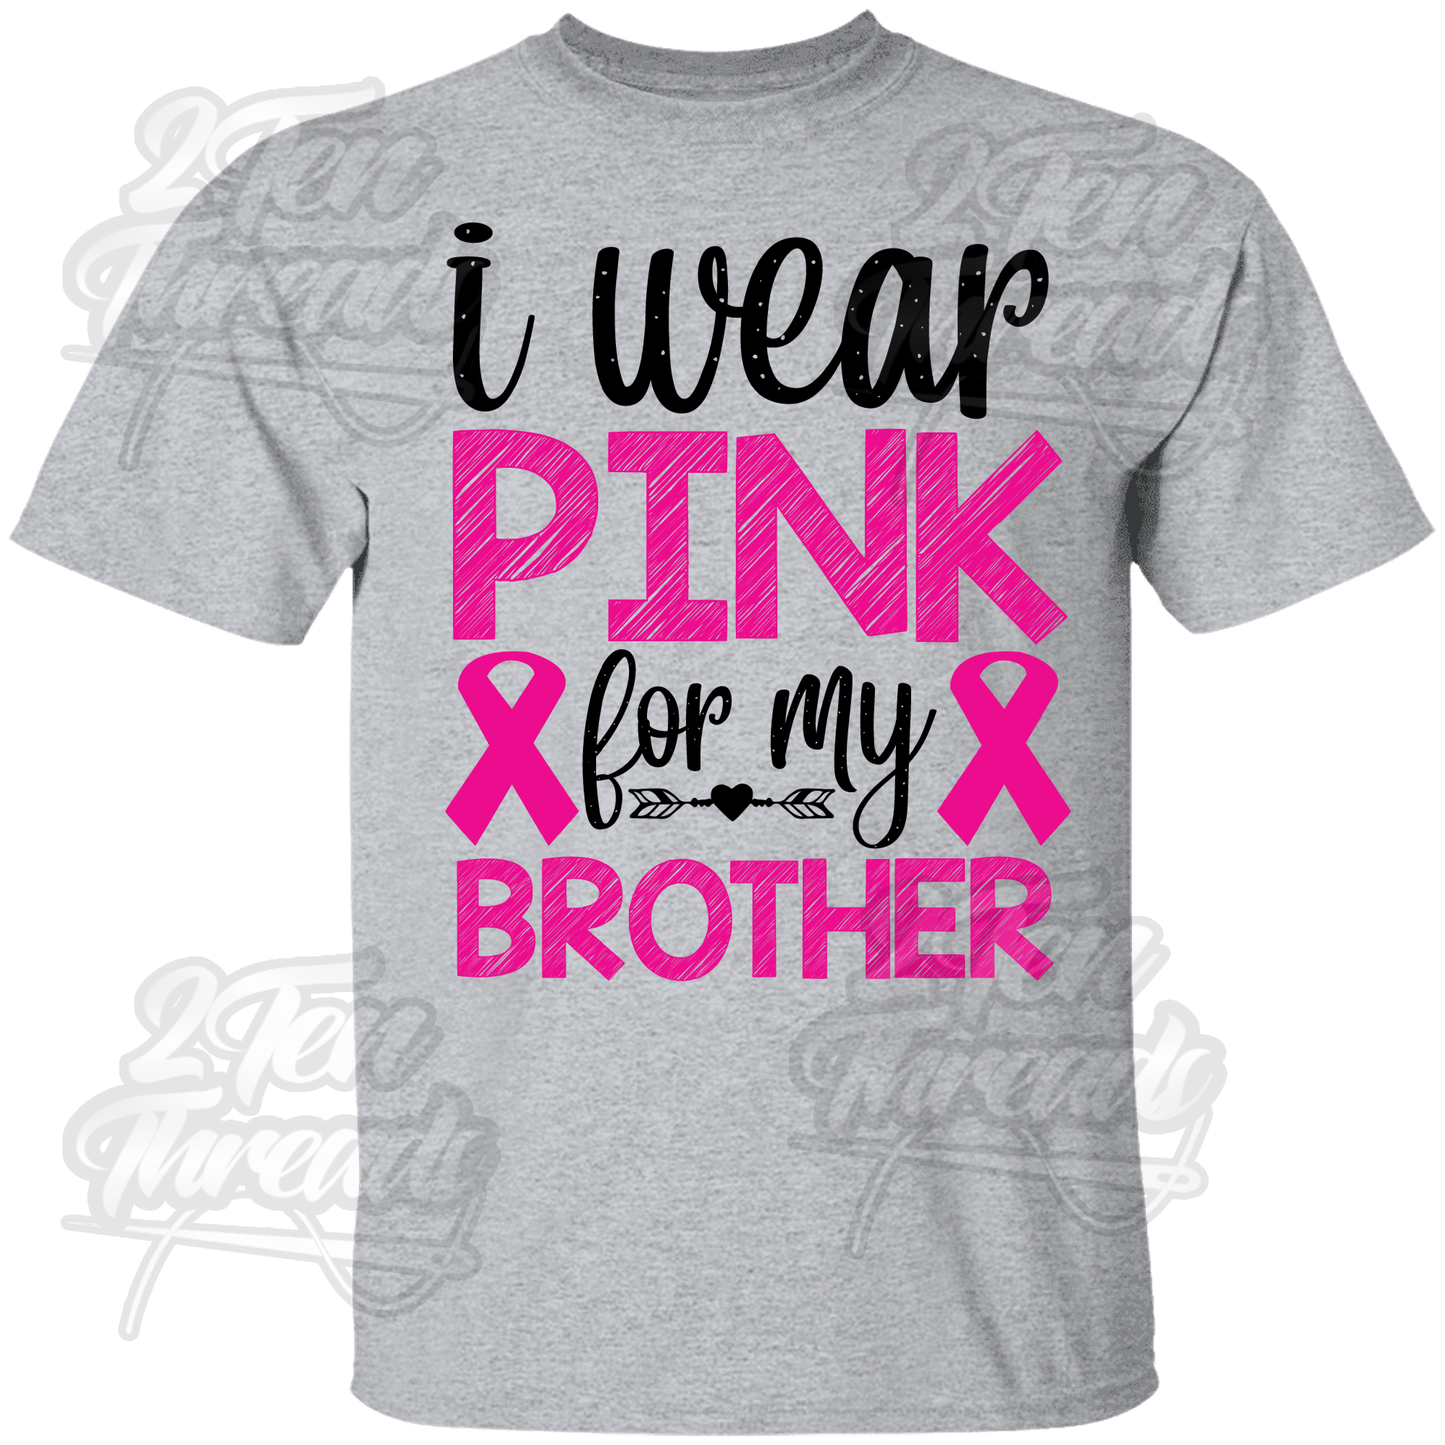 Pink for my Brother shirt